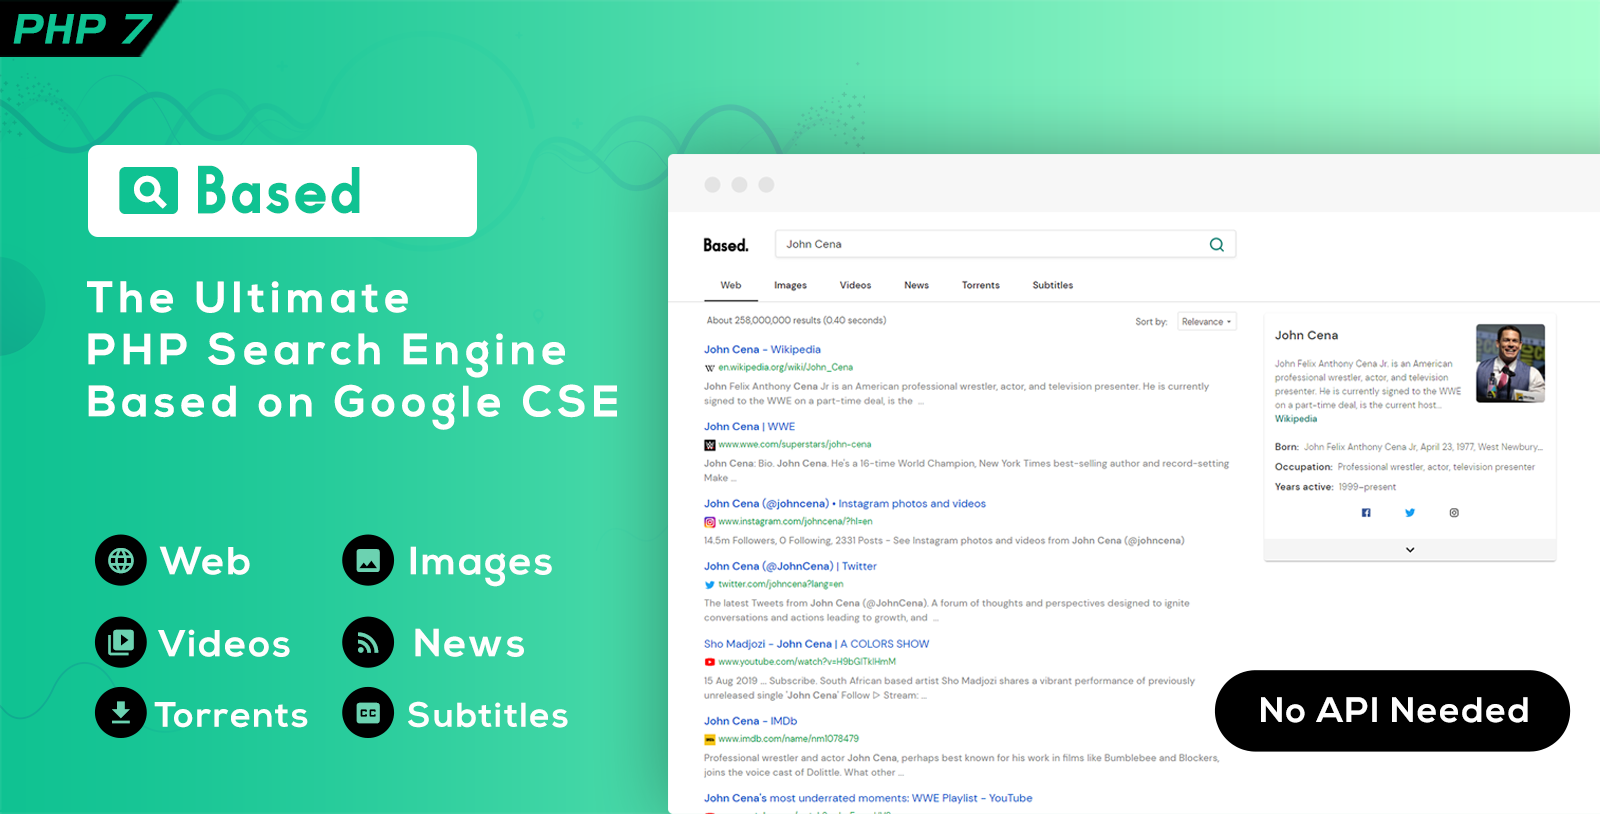 Get your own Google CSE Powered Search Engine without any API